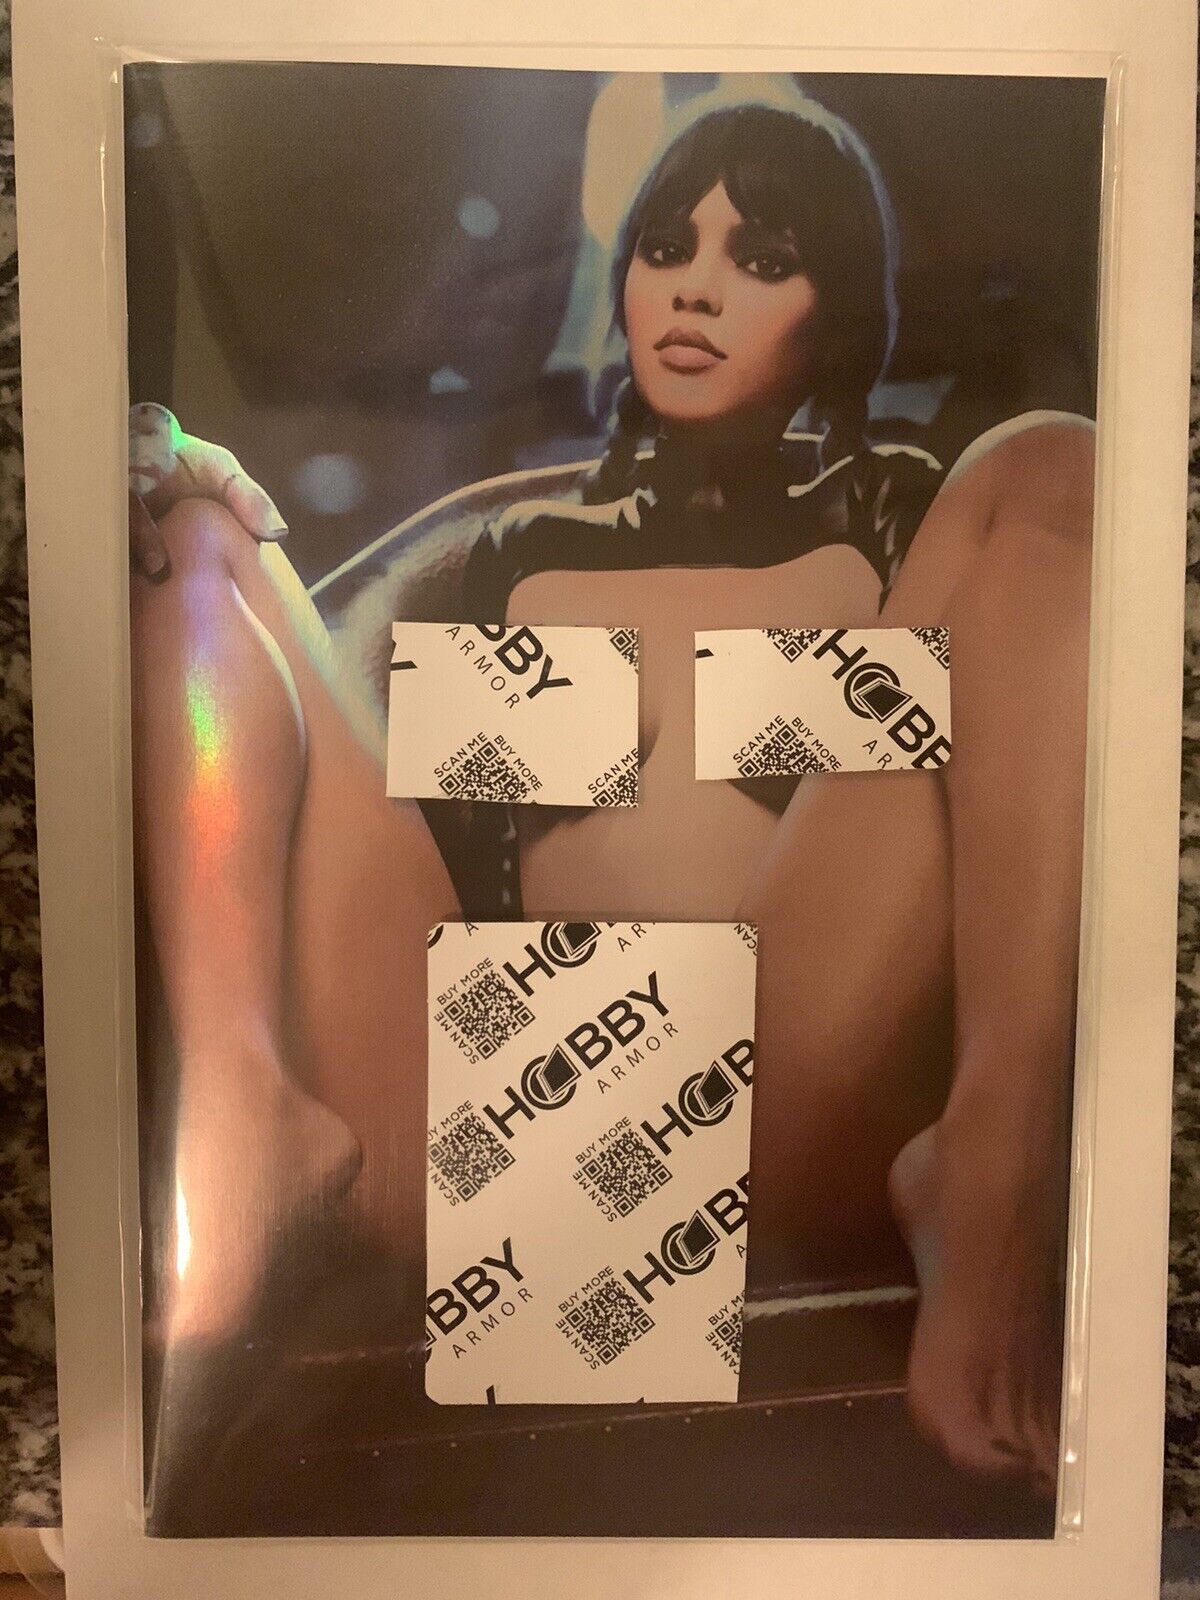 M House “Wednesday” Naughty Cover Limited To 20 Foil